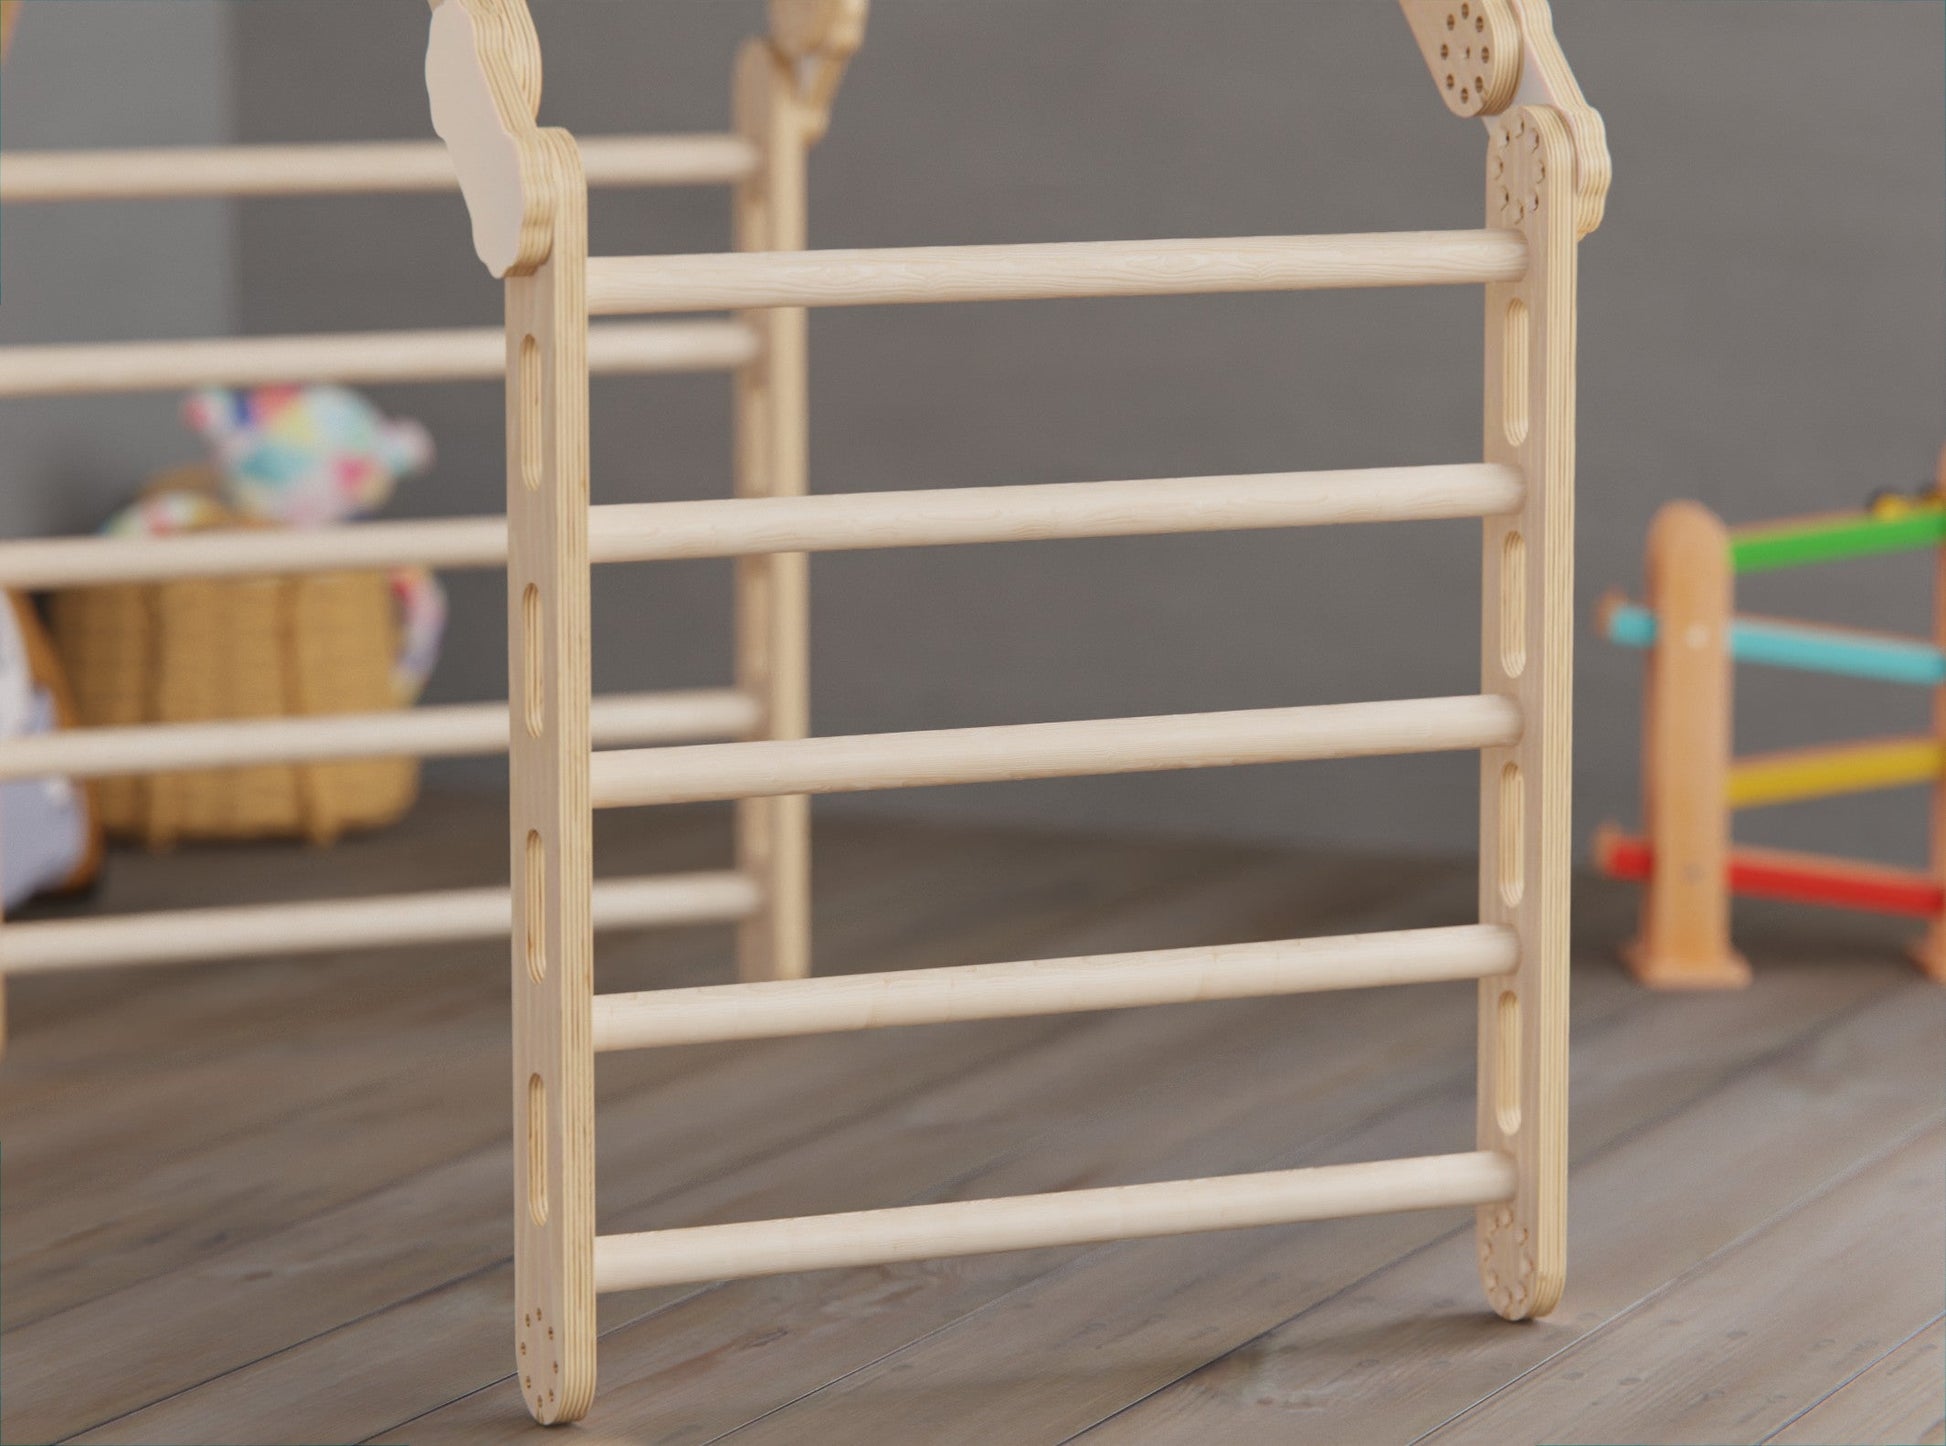 Experience infinite play possibilities with our versatile Wooden Pikler Triangle & Arch. Perfect for toddler development!